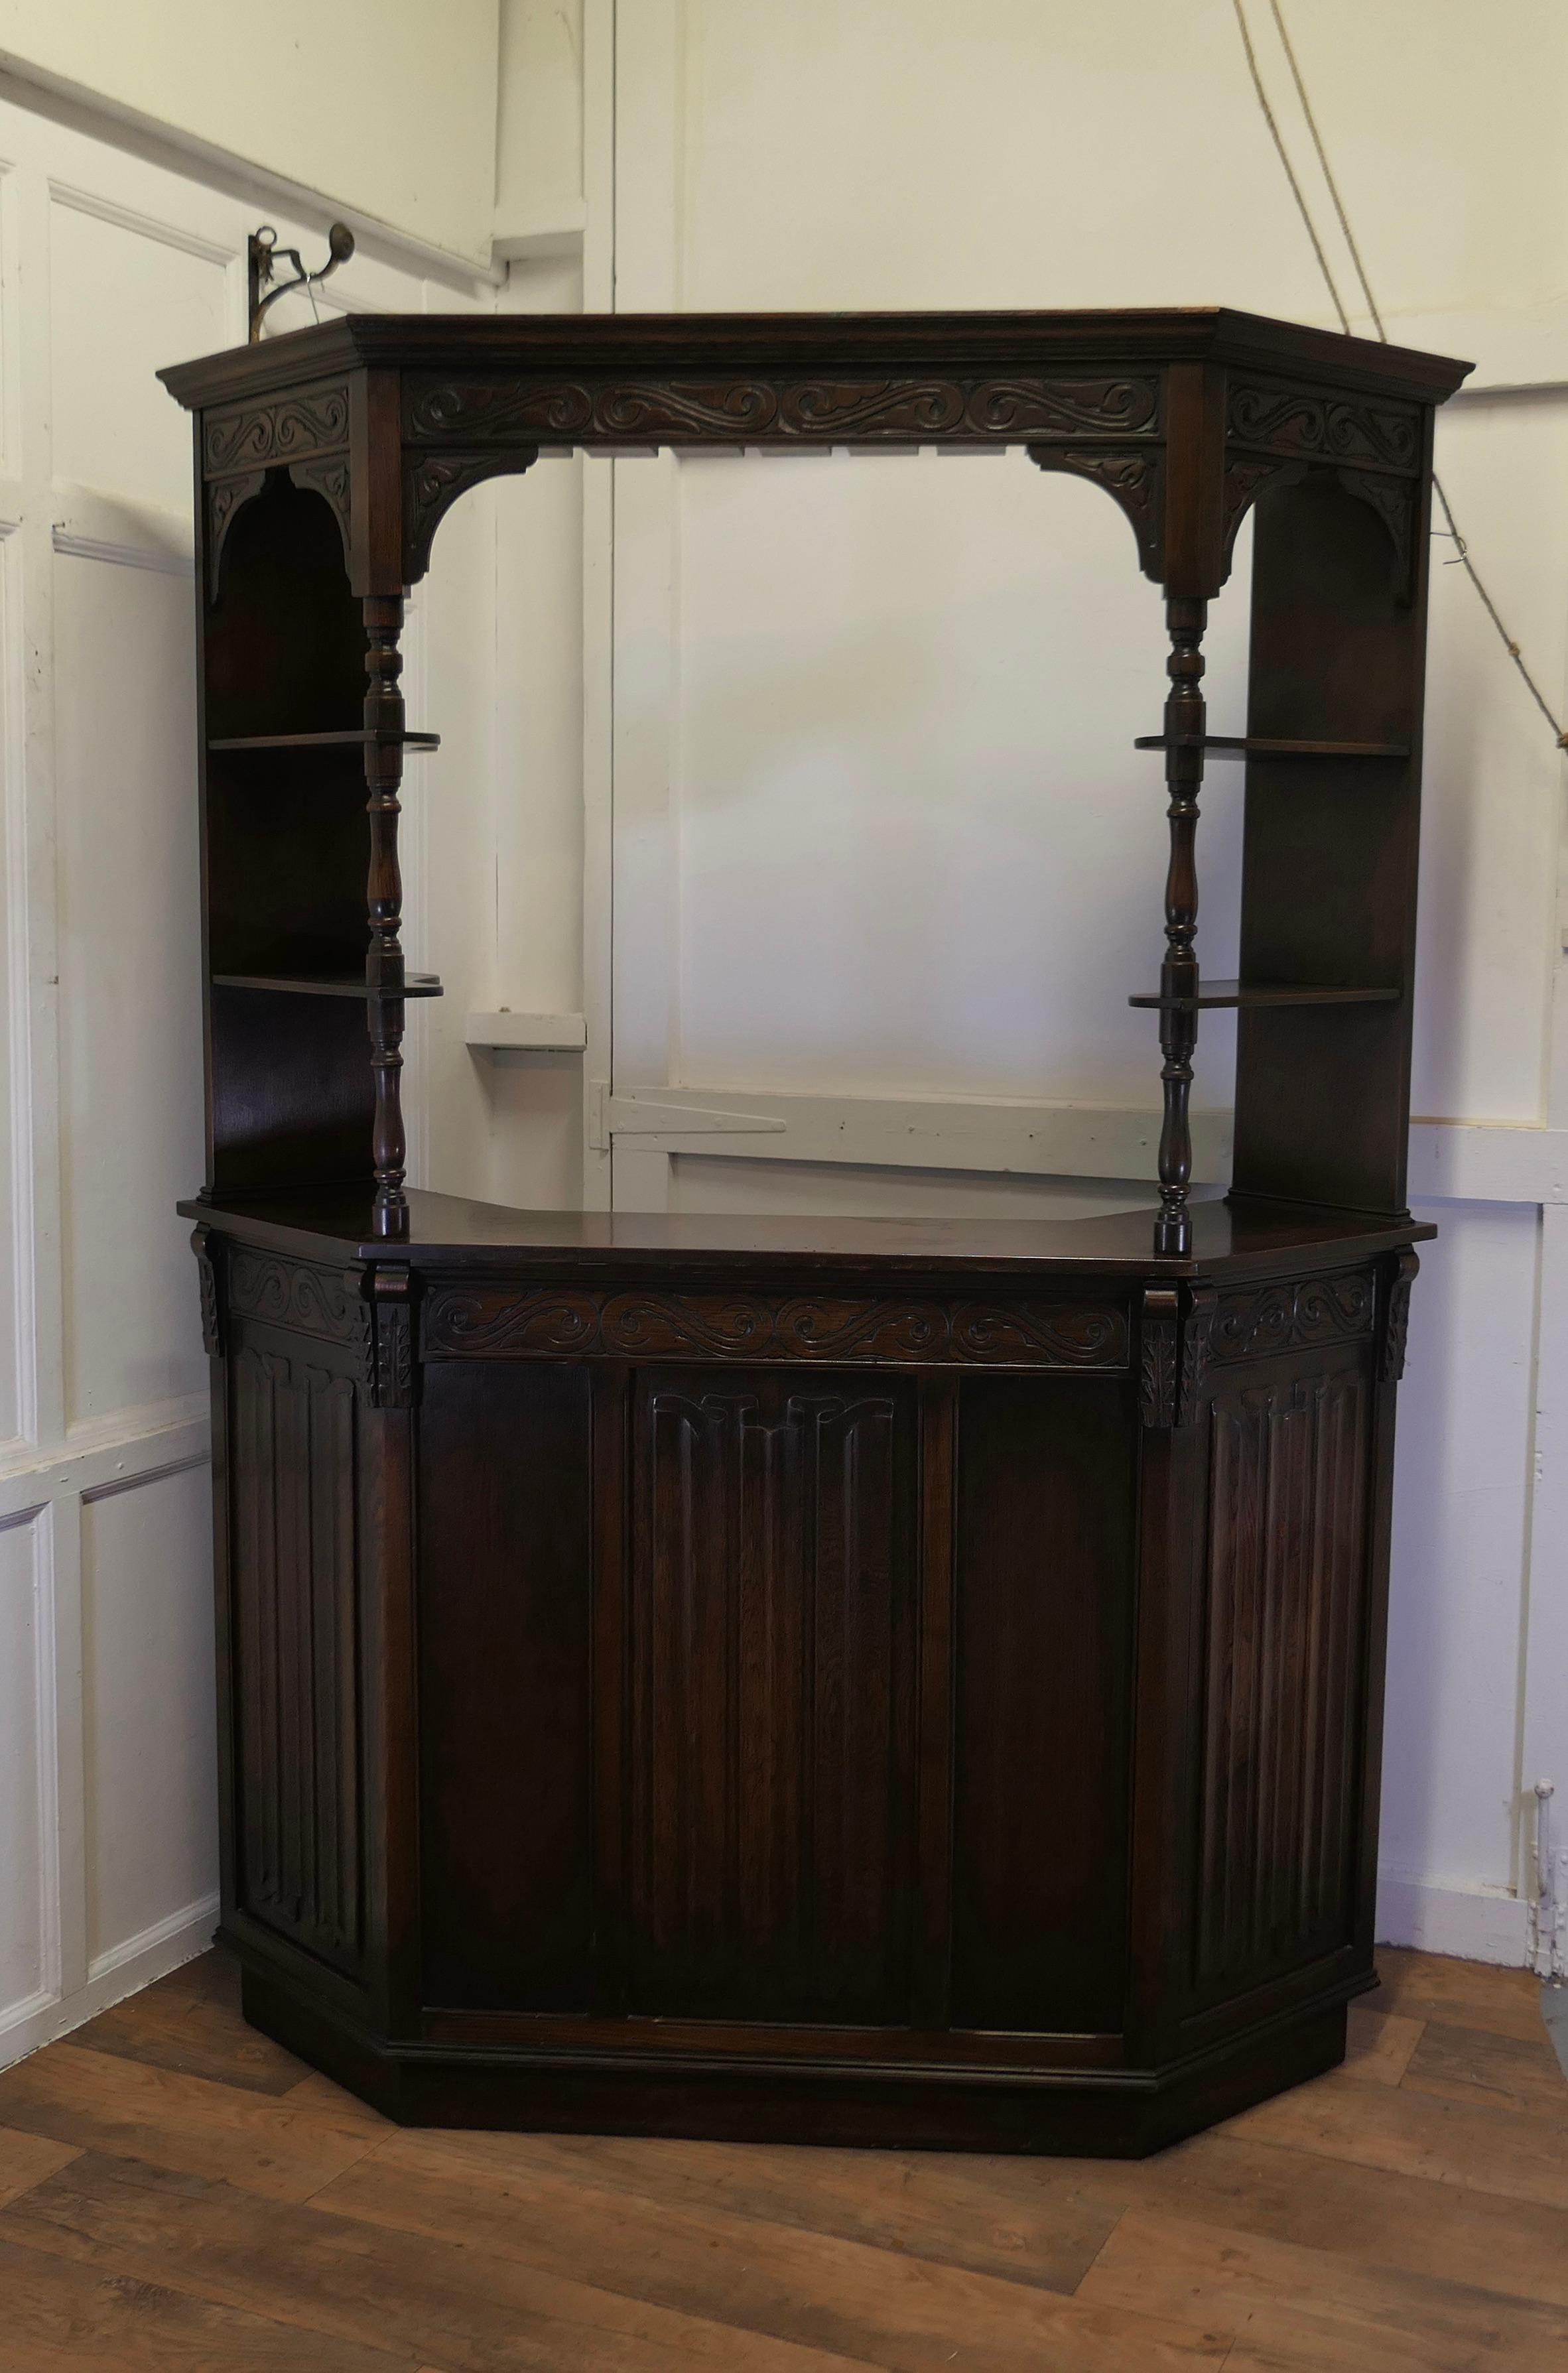 Country House Hostess Greeting Station, Reception Bar

A superb and traditional piece, the bar comes from a Country House Hotel, it is made in linenfold carved oak in the Gothic style, it has a 3 sided front counter and shelves at the sides. From